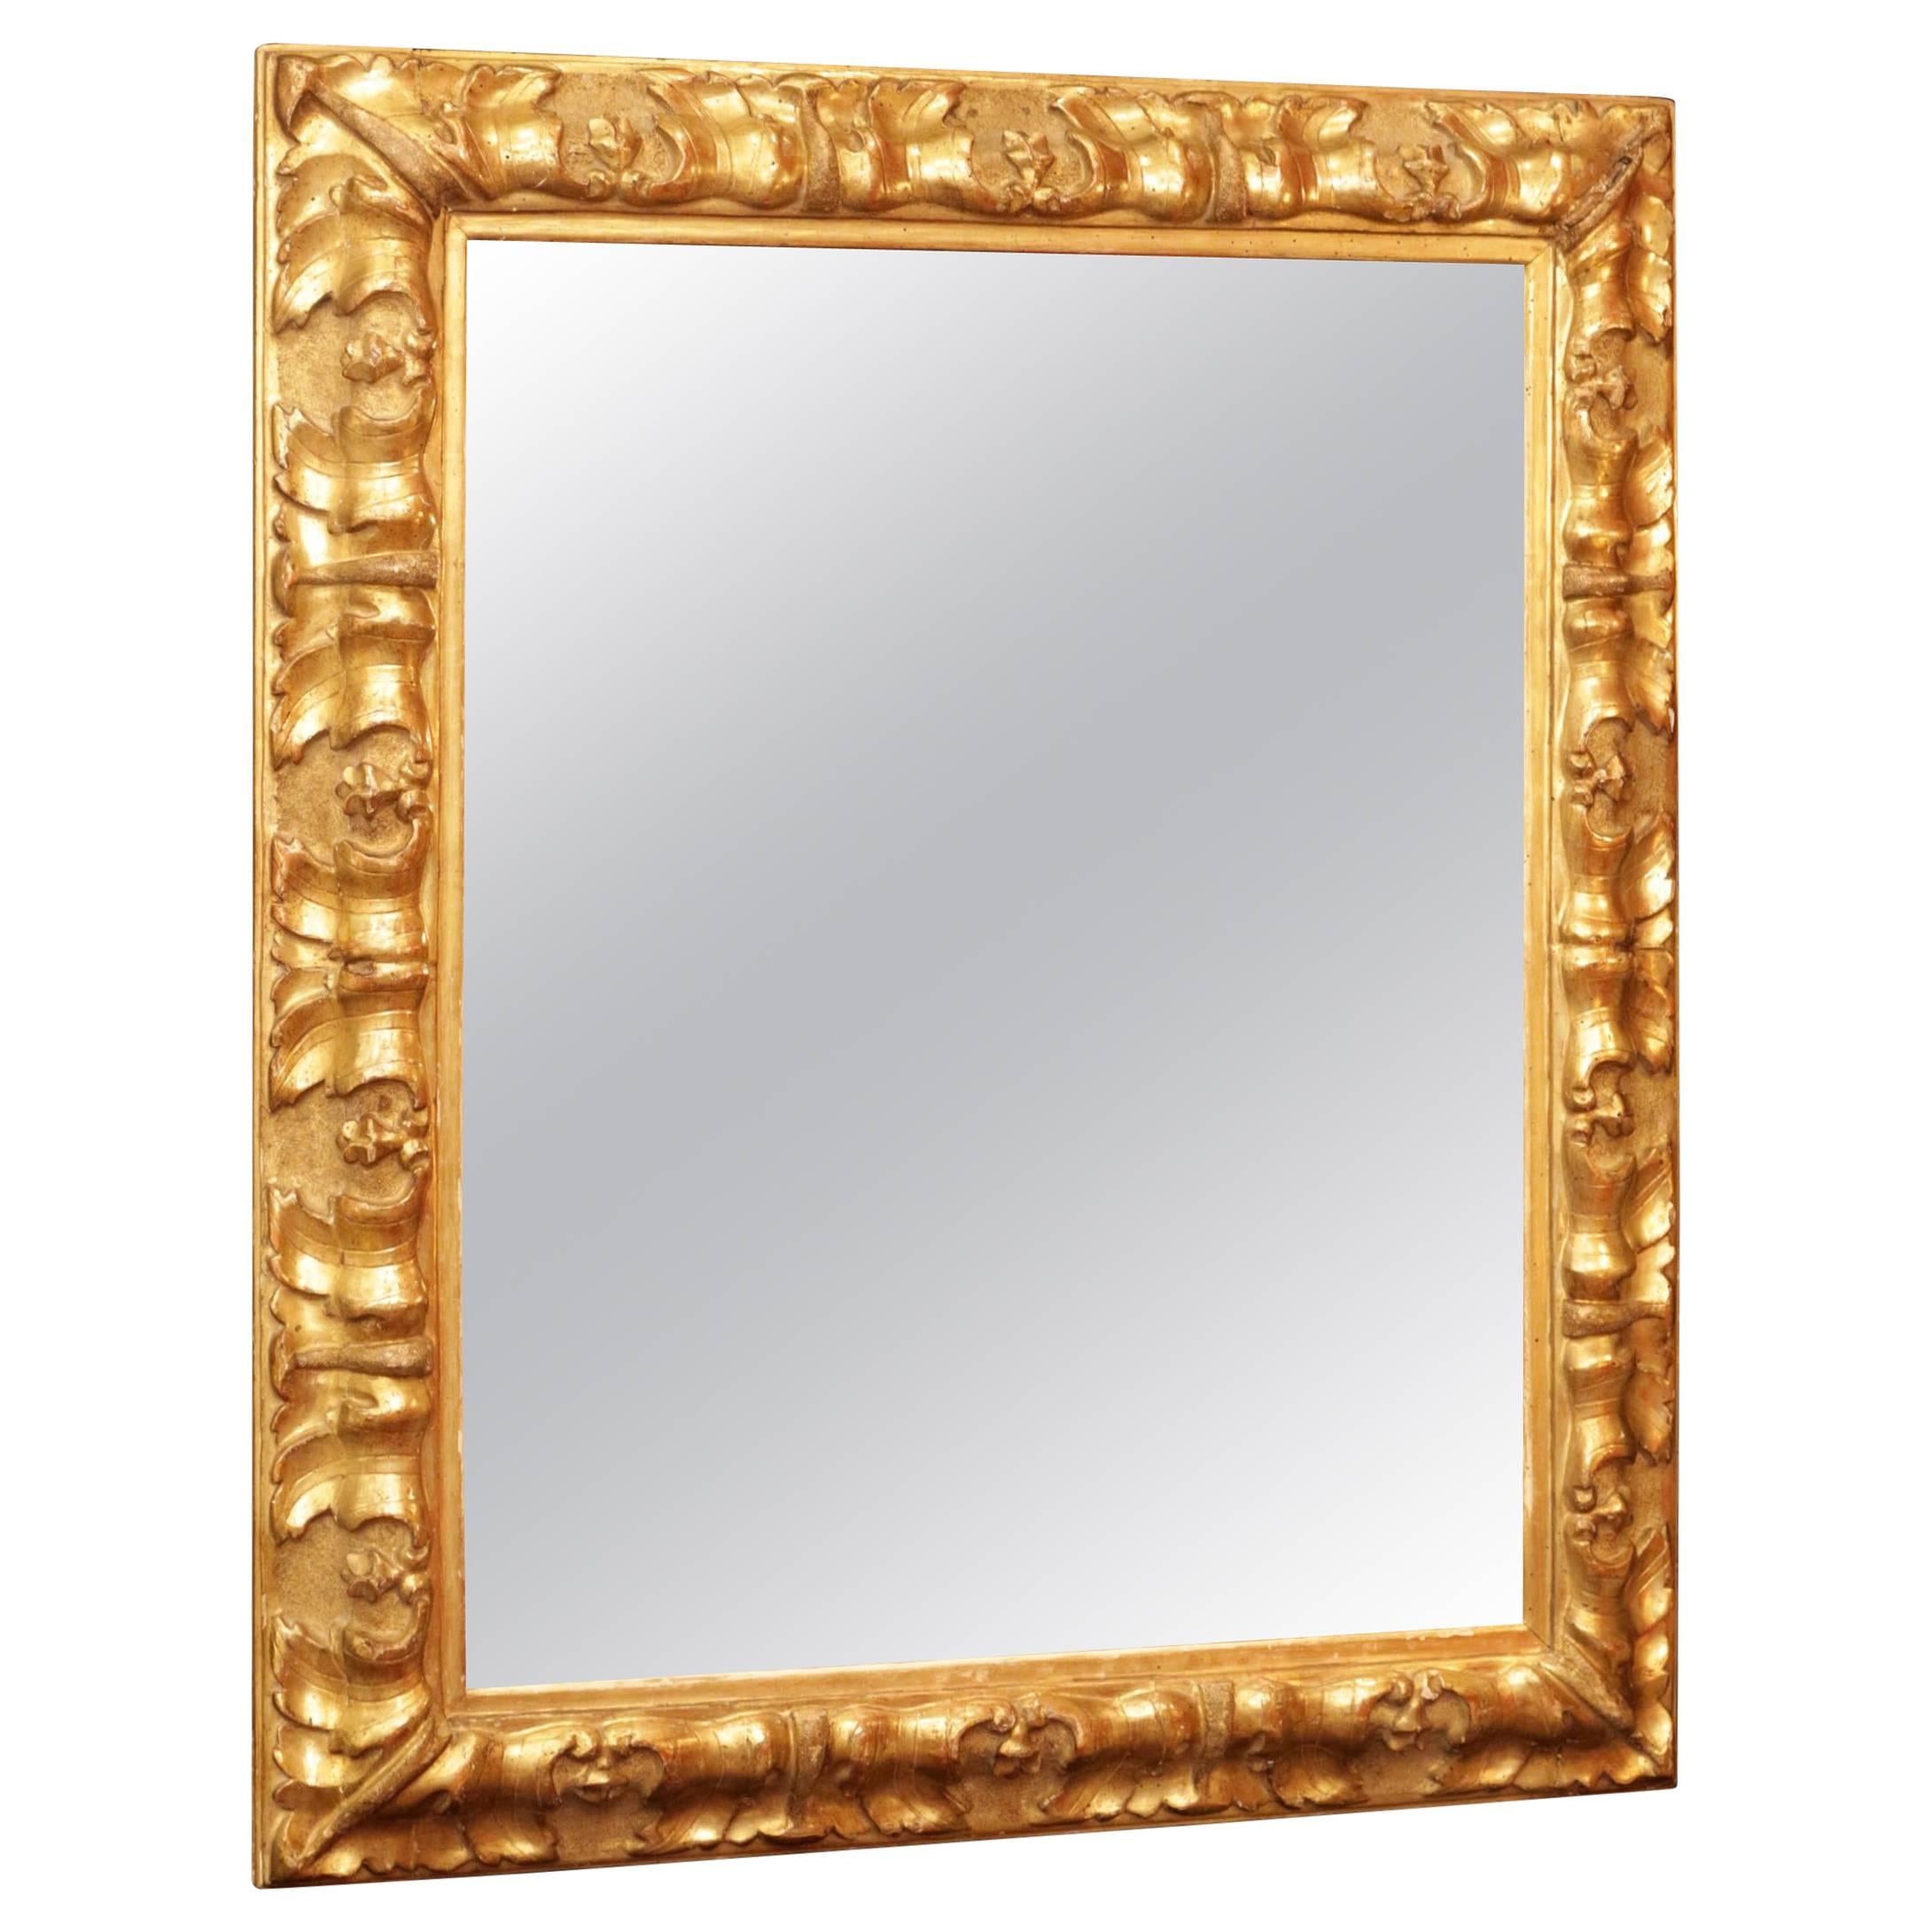 Mirror in Gilt Wood and Gesso from the 19th Century Period of Napoleon III